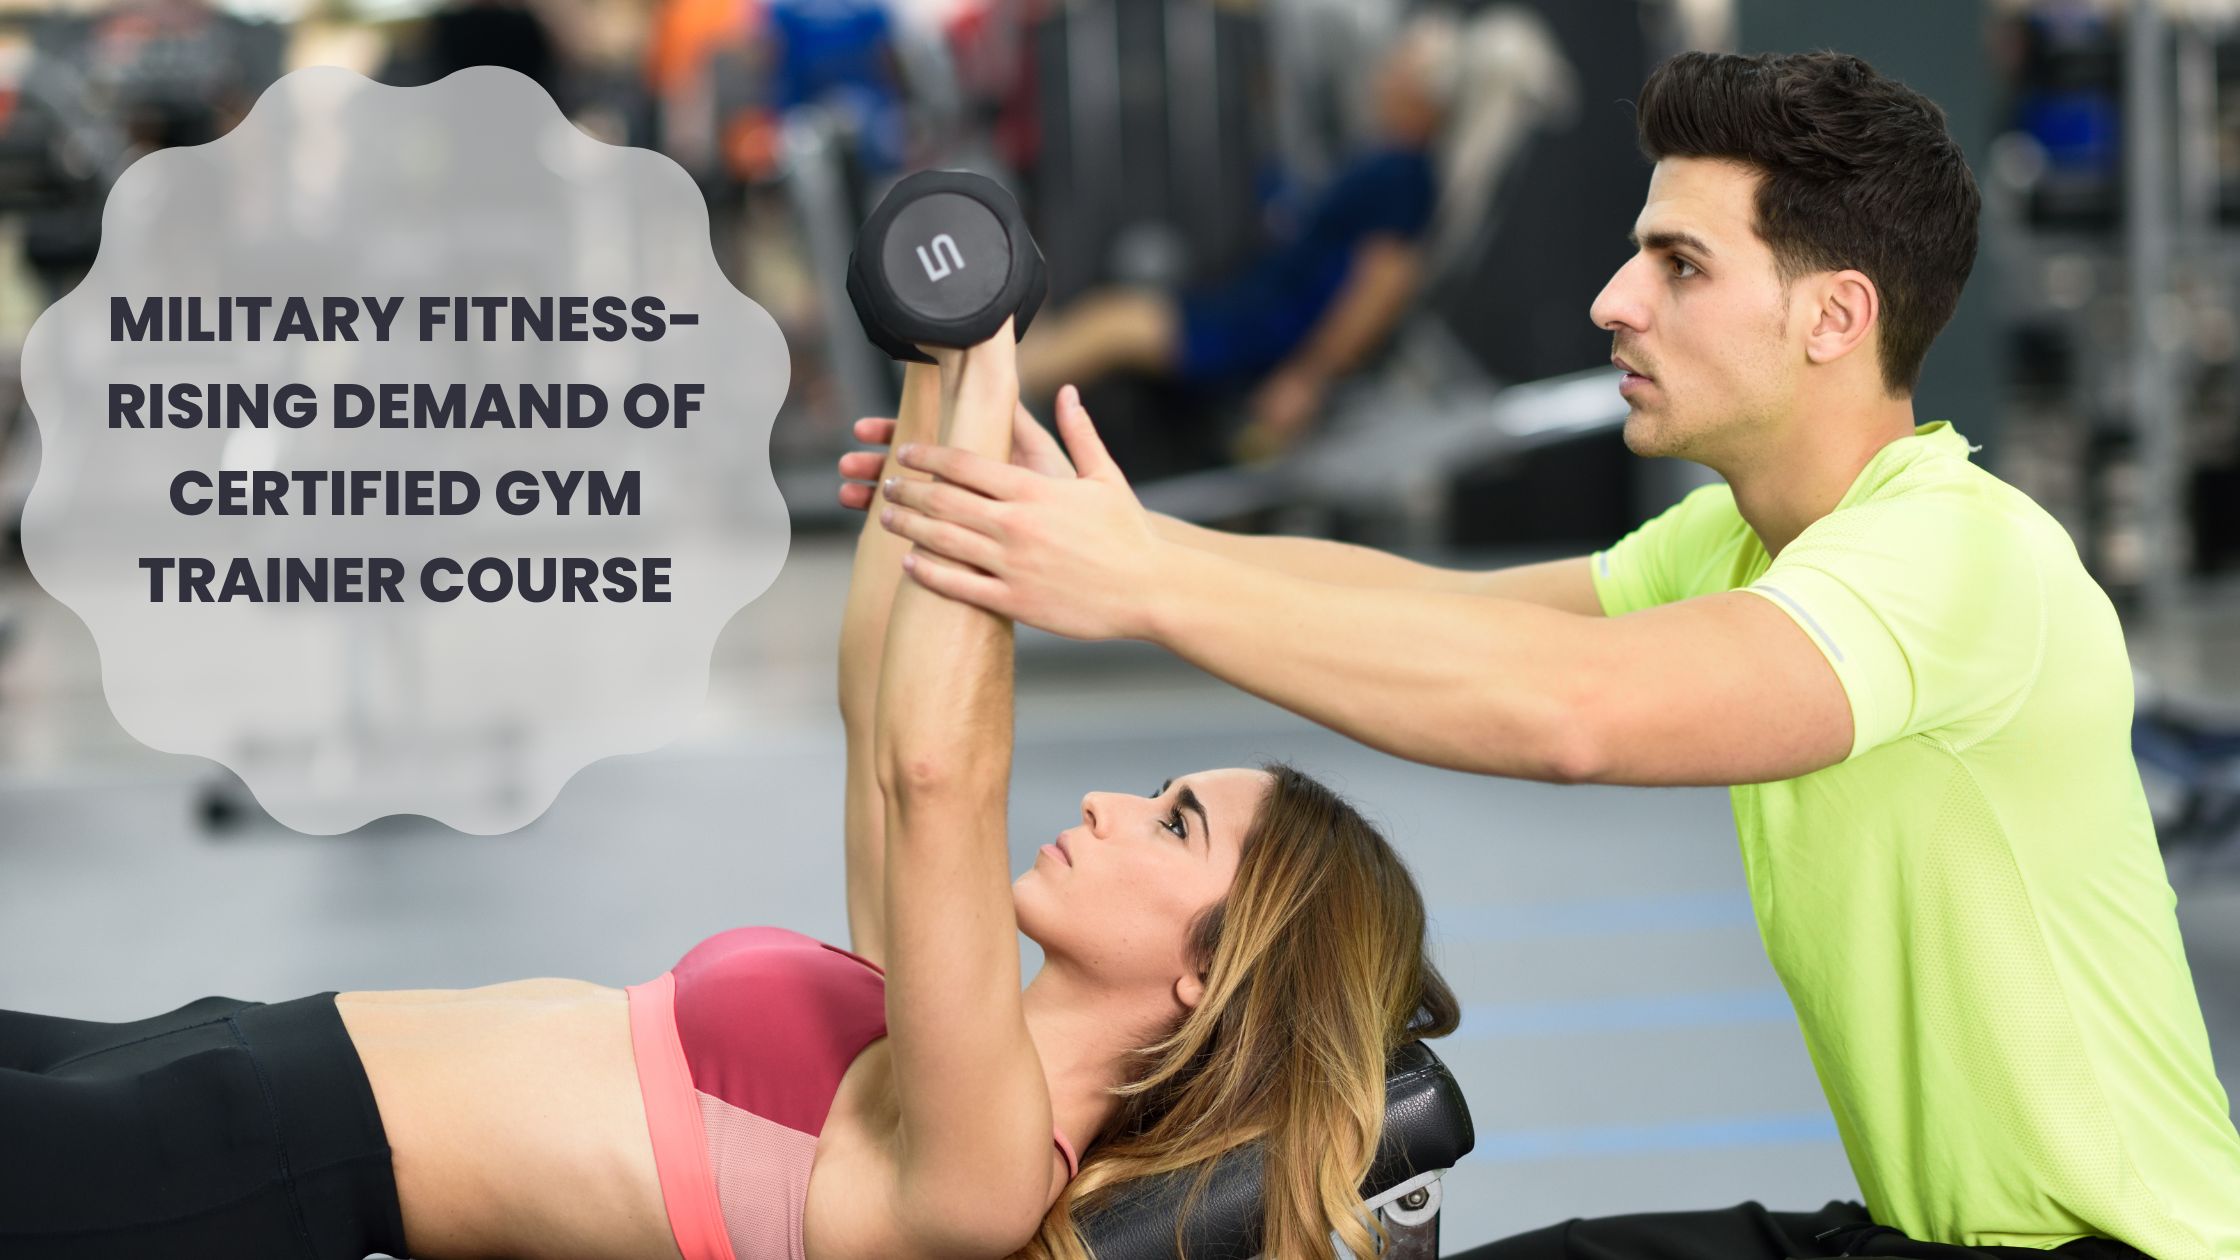 Military Fitness-Rising demand of certified gym trainer course